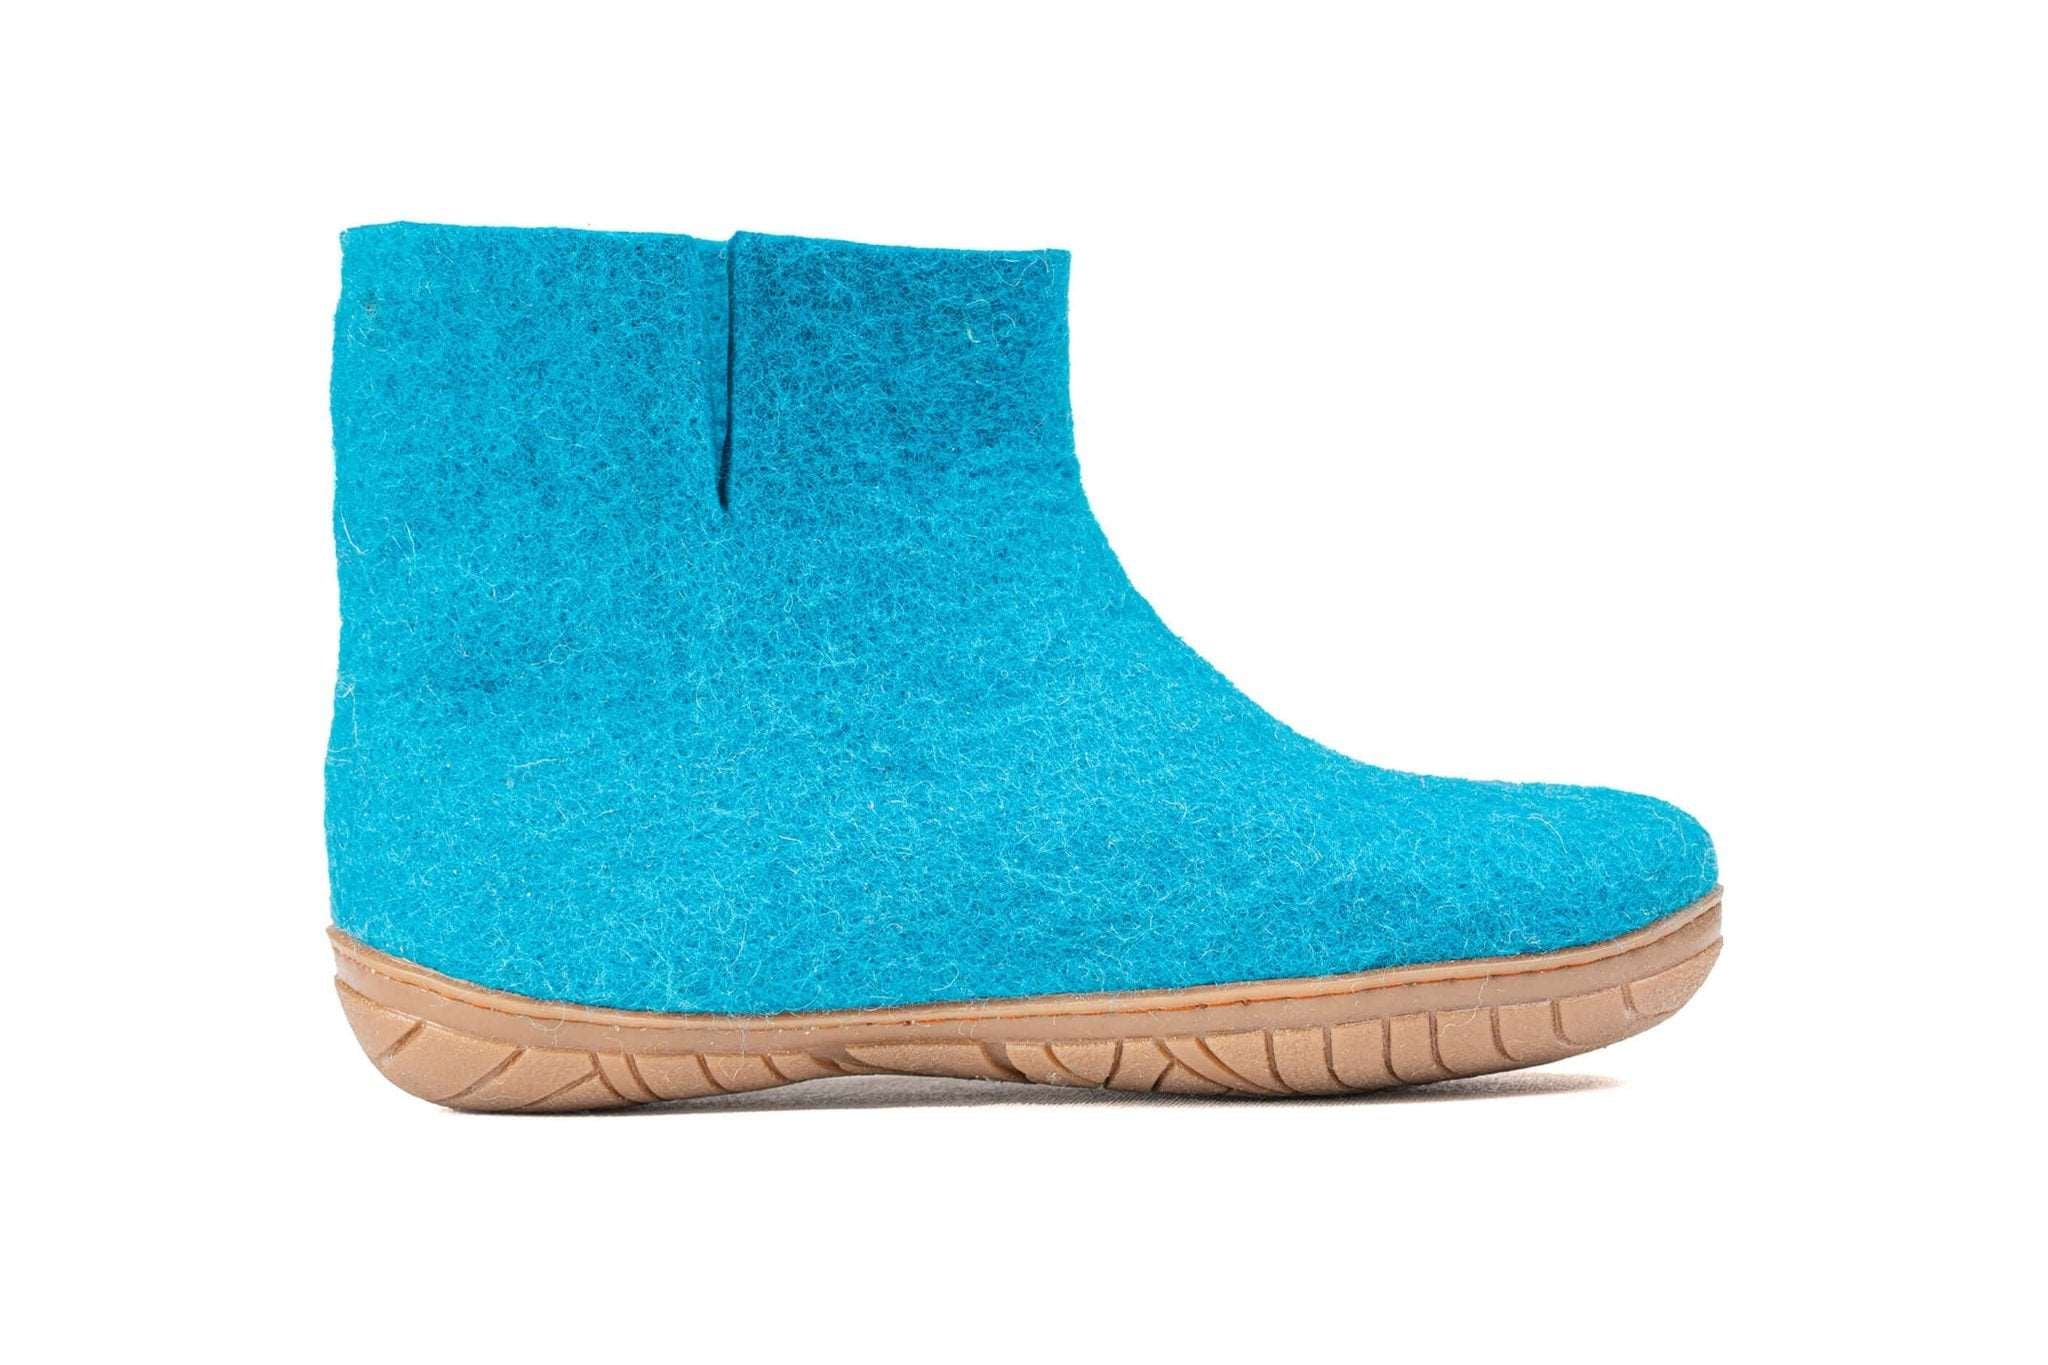 Outdoor Low Boots With Rubber Sole - Turquoise - Woollyes